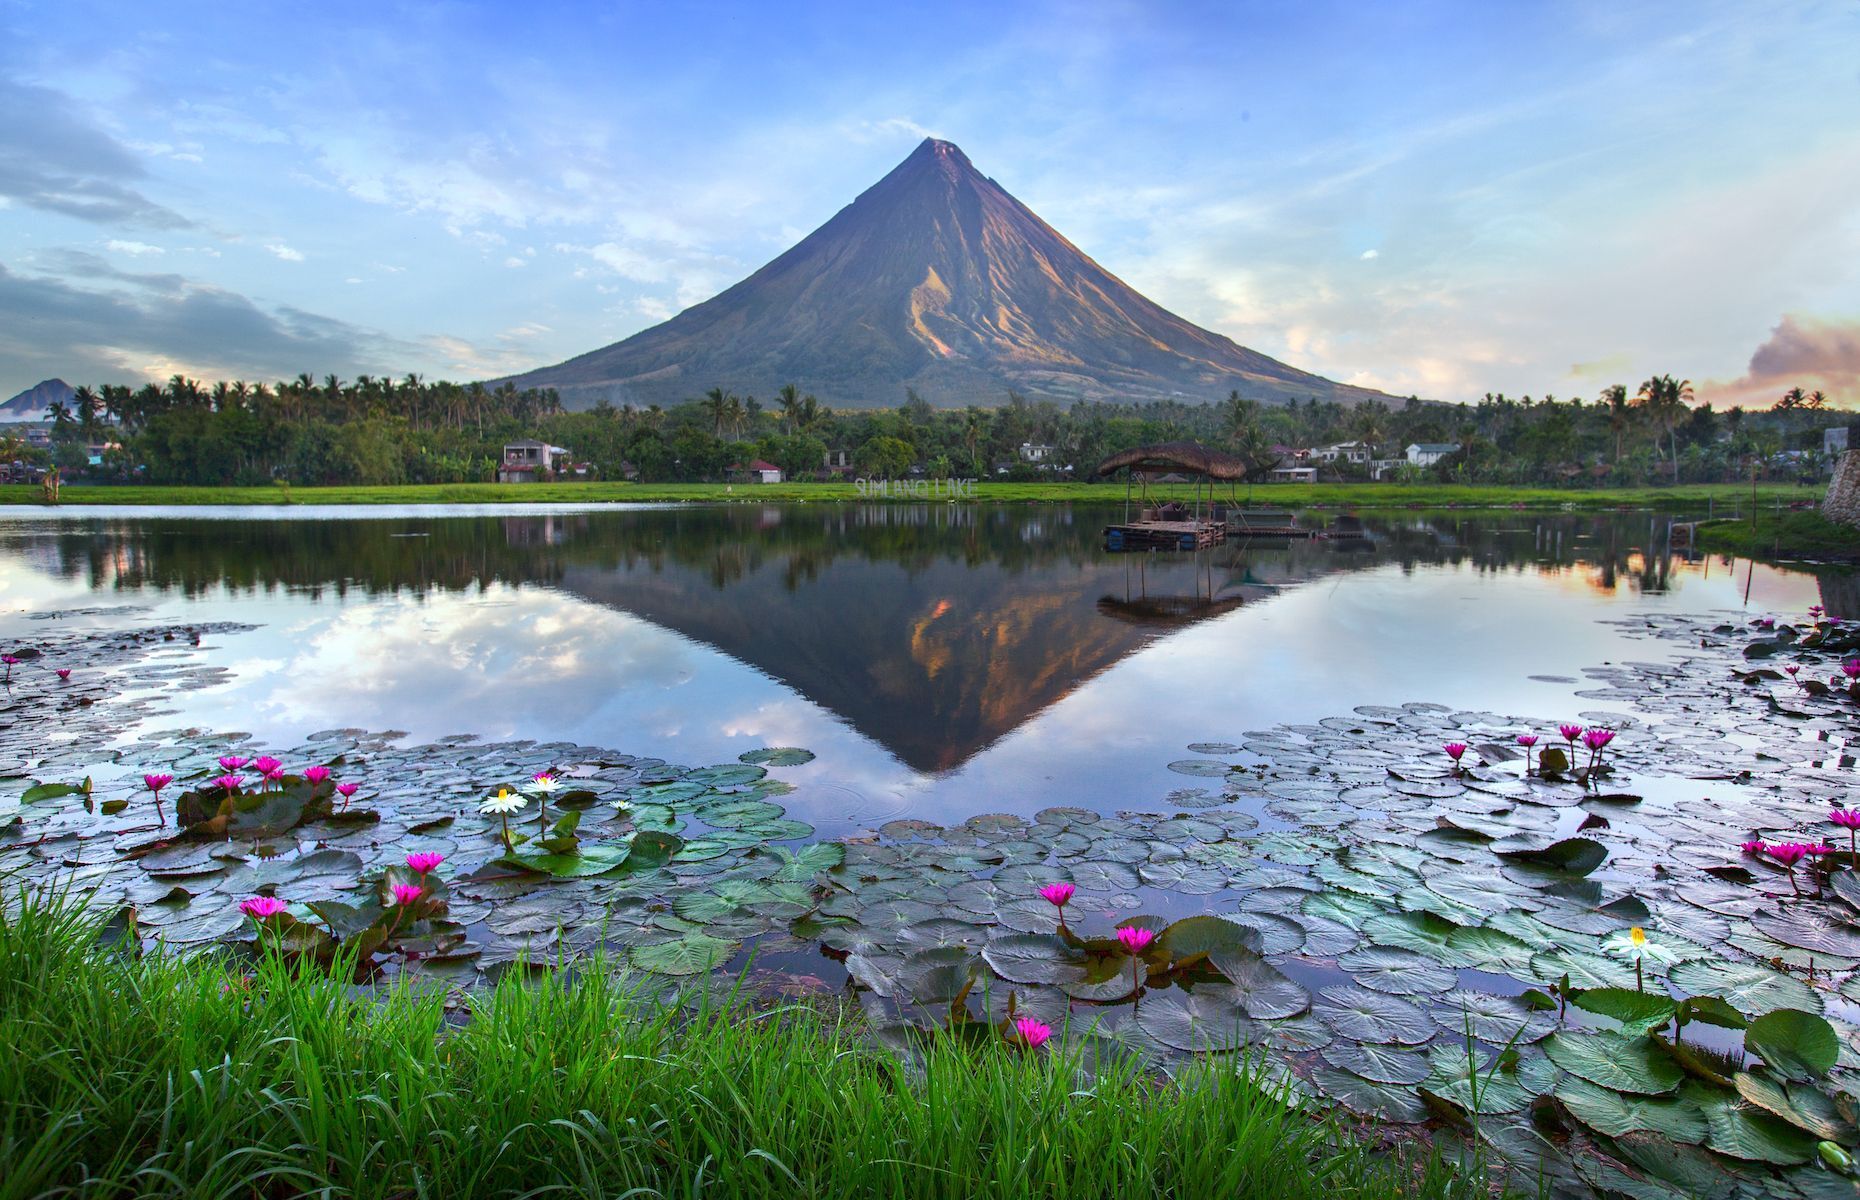 Nature lovers are in for a treat when they visit the Philippines’ <a href="https://www.universal-traveller.com/11-best-things-to-do-in-bicol-philippines/" rel="noreferrer noopener">Bicol</a> region and its imposing, majestic Mayon volcano between December and April. Seashore lovers will appreciate the palm-fringed beaches of Caramoan and Donsol, famous for whale shark sightings. Travellers can also explore the Calaguas Caves and hike through a rainforest.